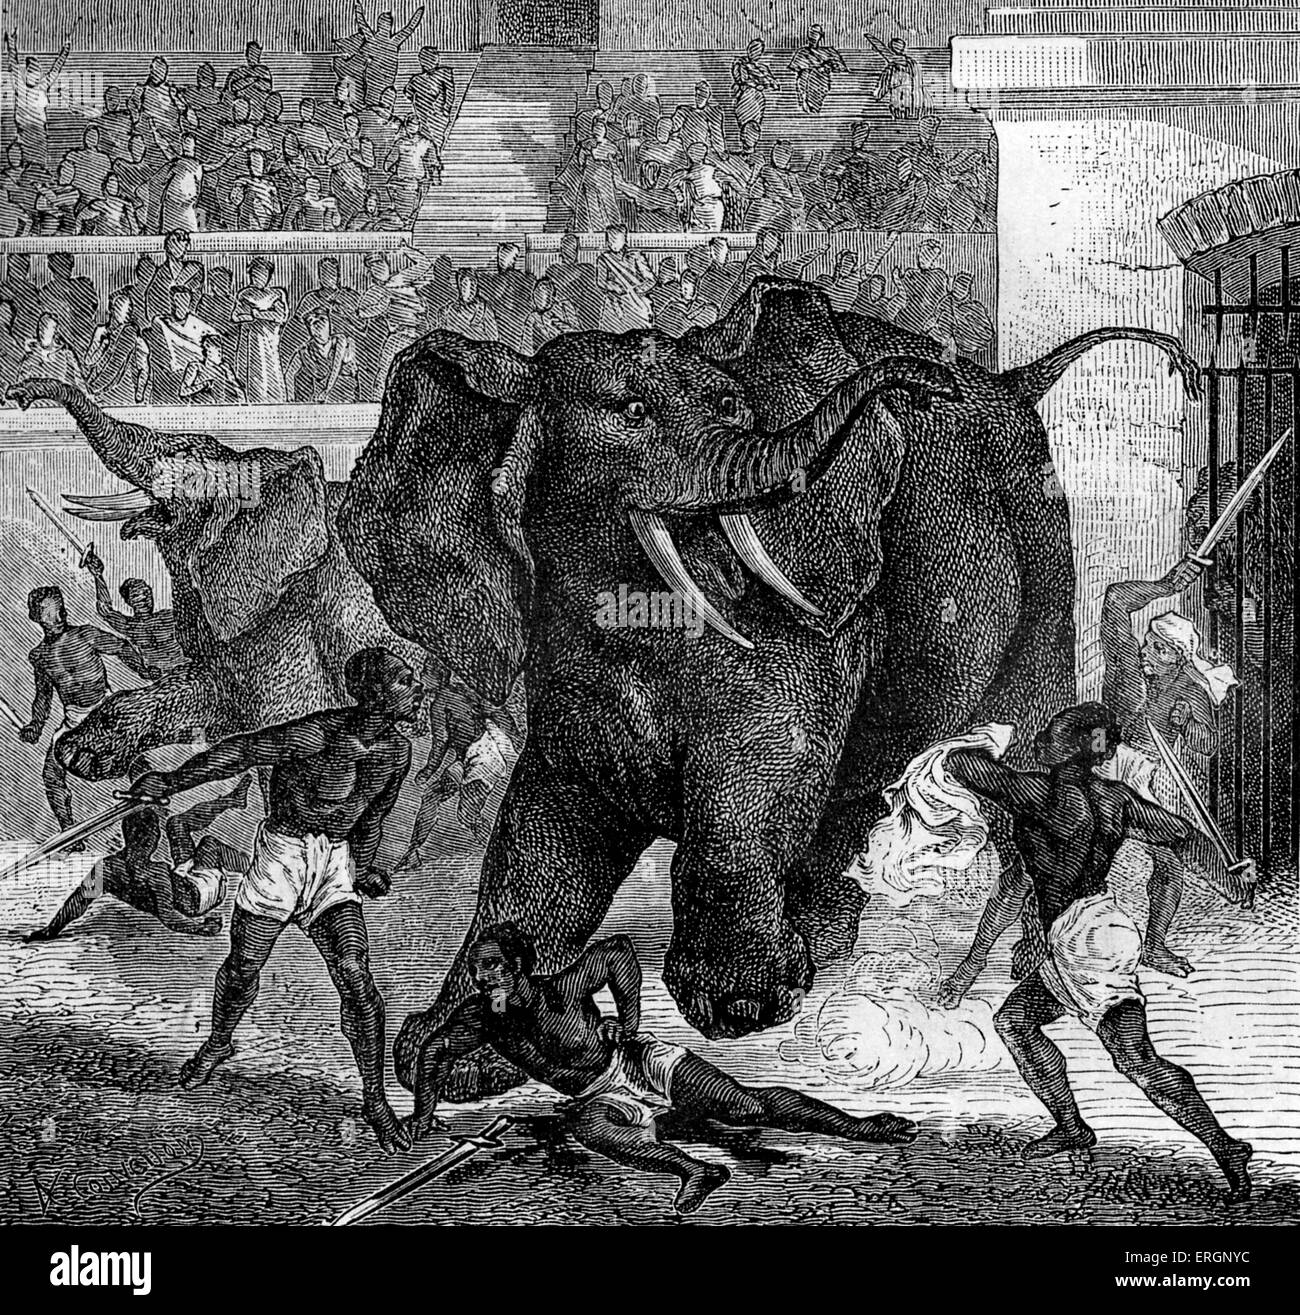 Roman Circus. Crowds watch slaves fighting elephants with swords. Stock Photo